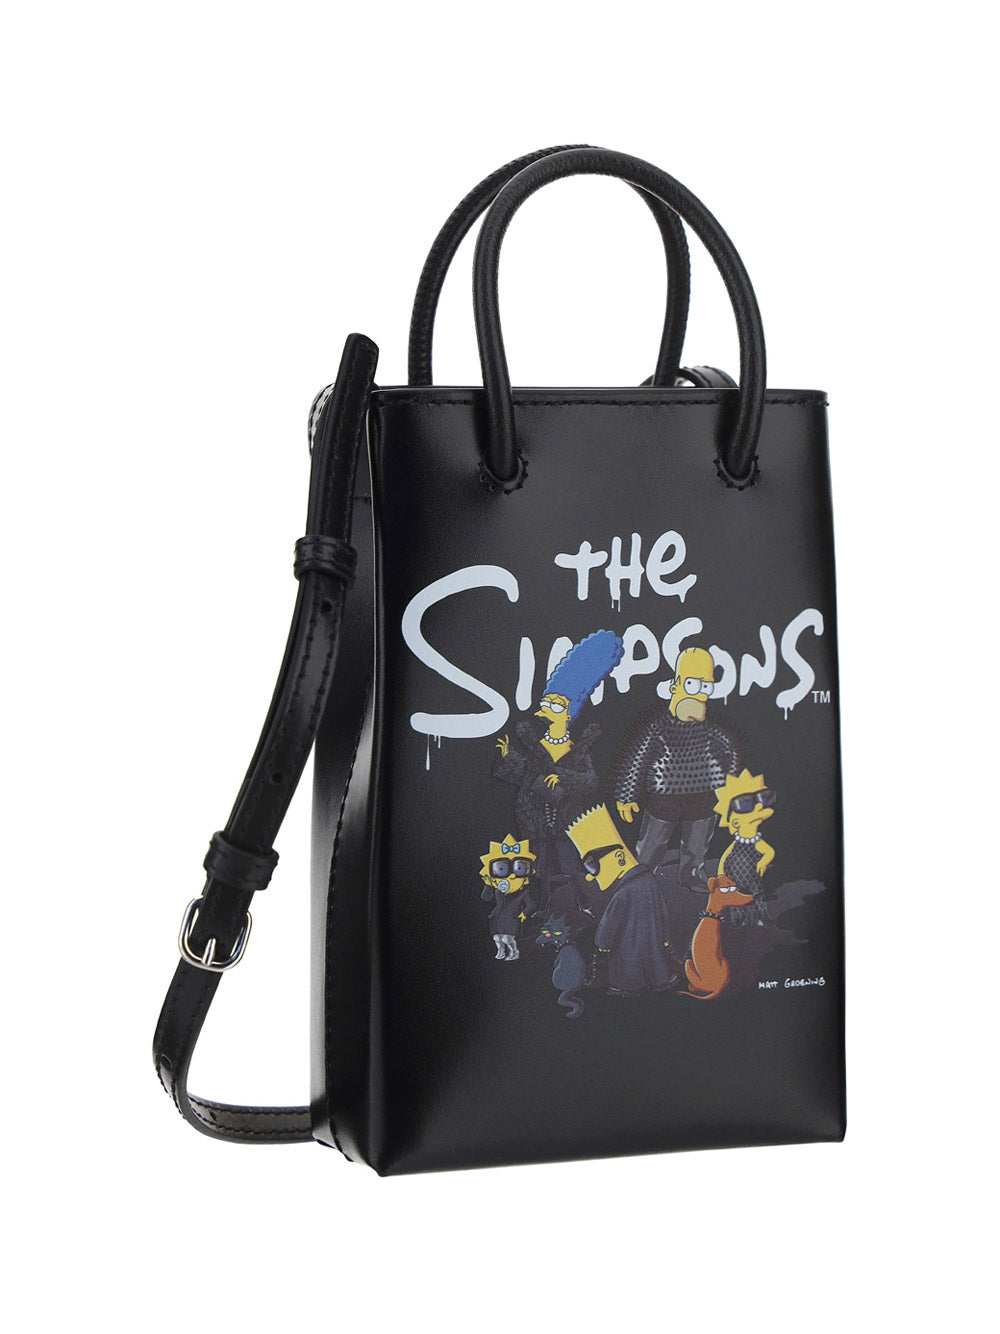 The Simpons TM &© 20TH Television Mini Shopping Bag In Shiny Calfskin - Black